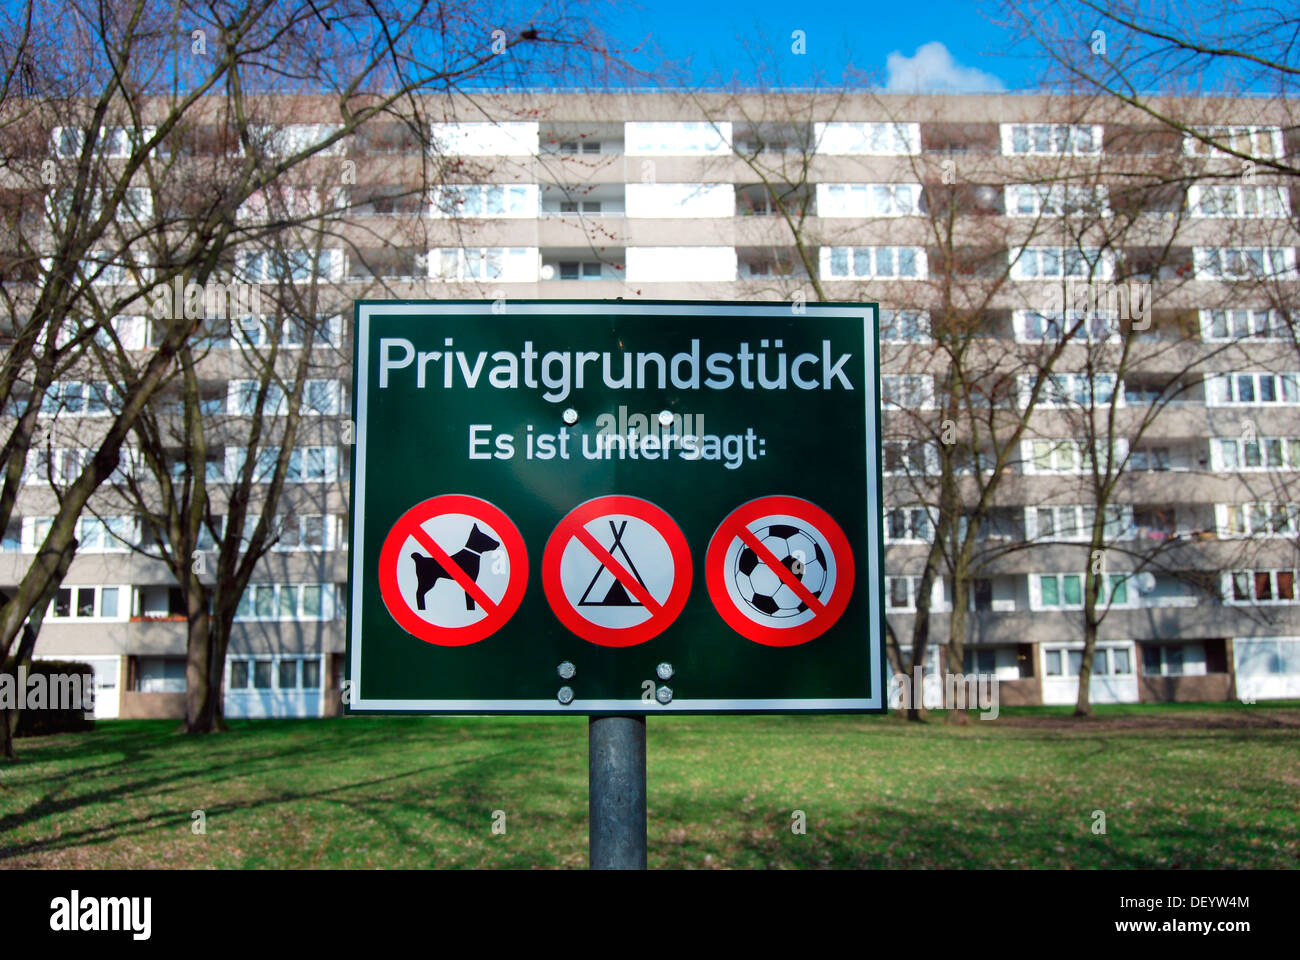 Sign, Privatgrundstueck, German for Private Property, Duesseldorf, North Rhine-Westphalia Stock Photo